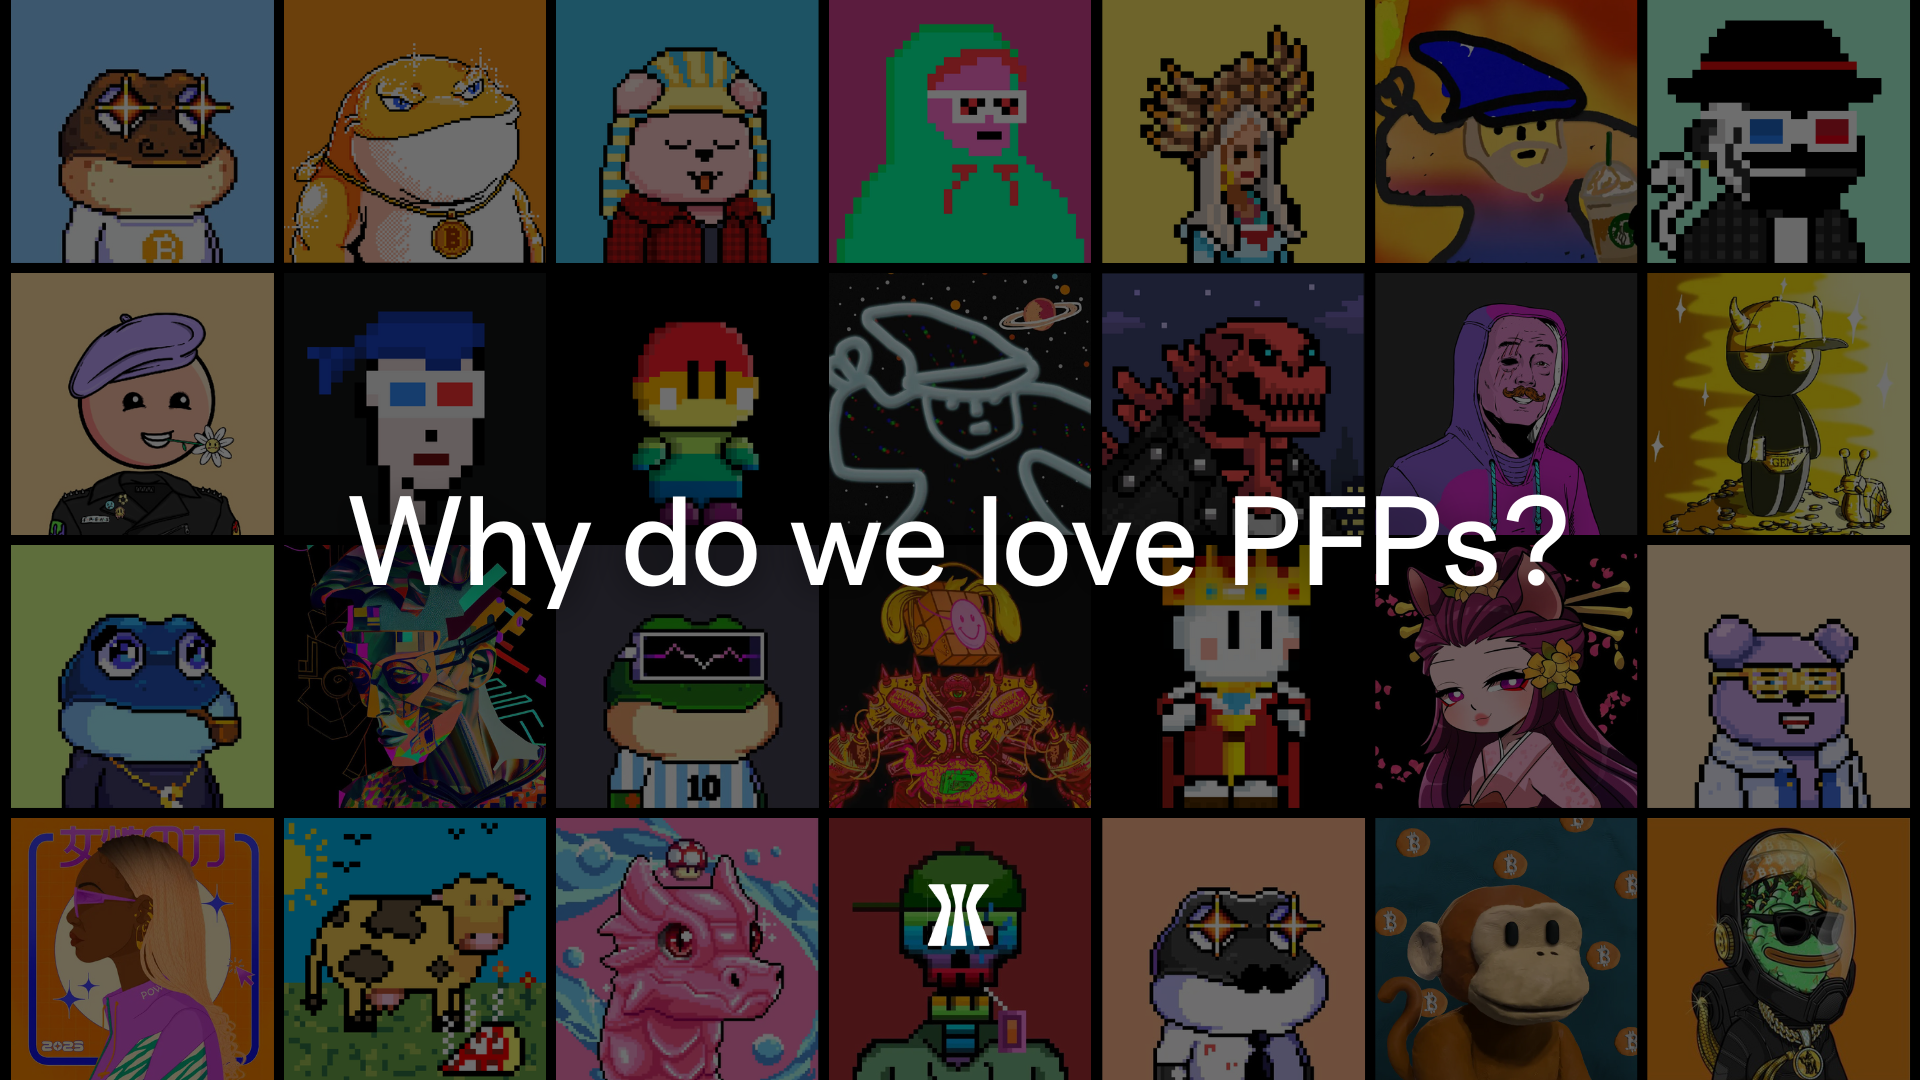 Why do we love PFPs